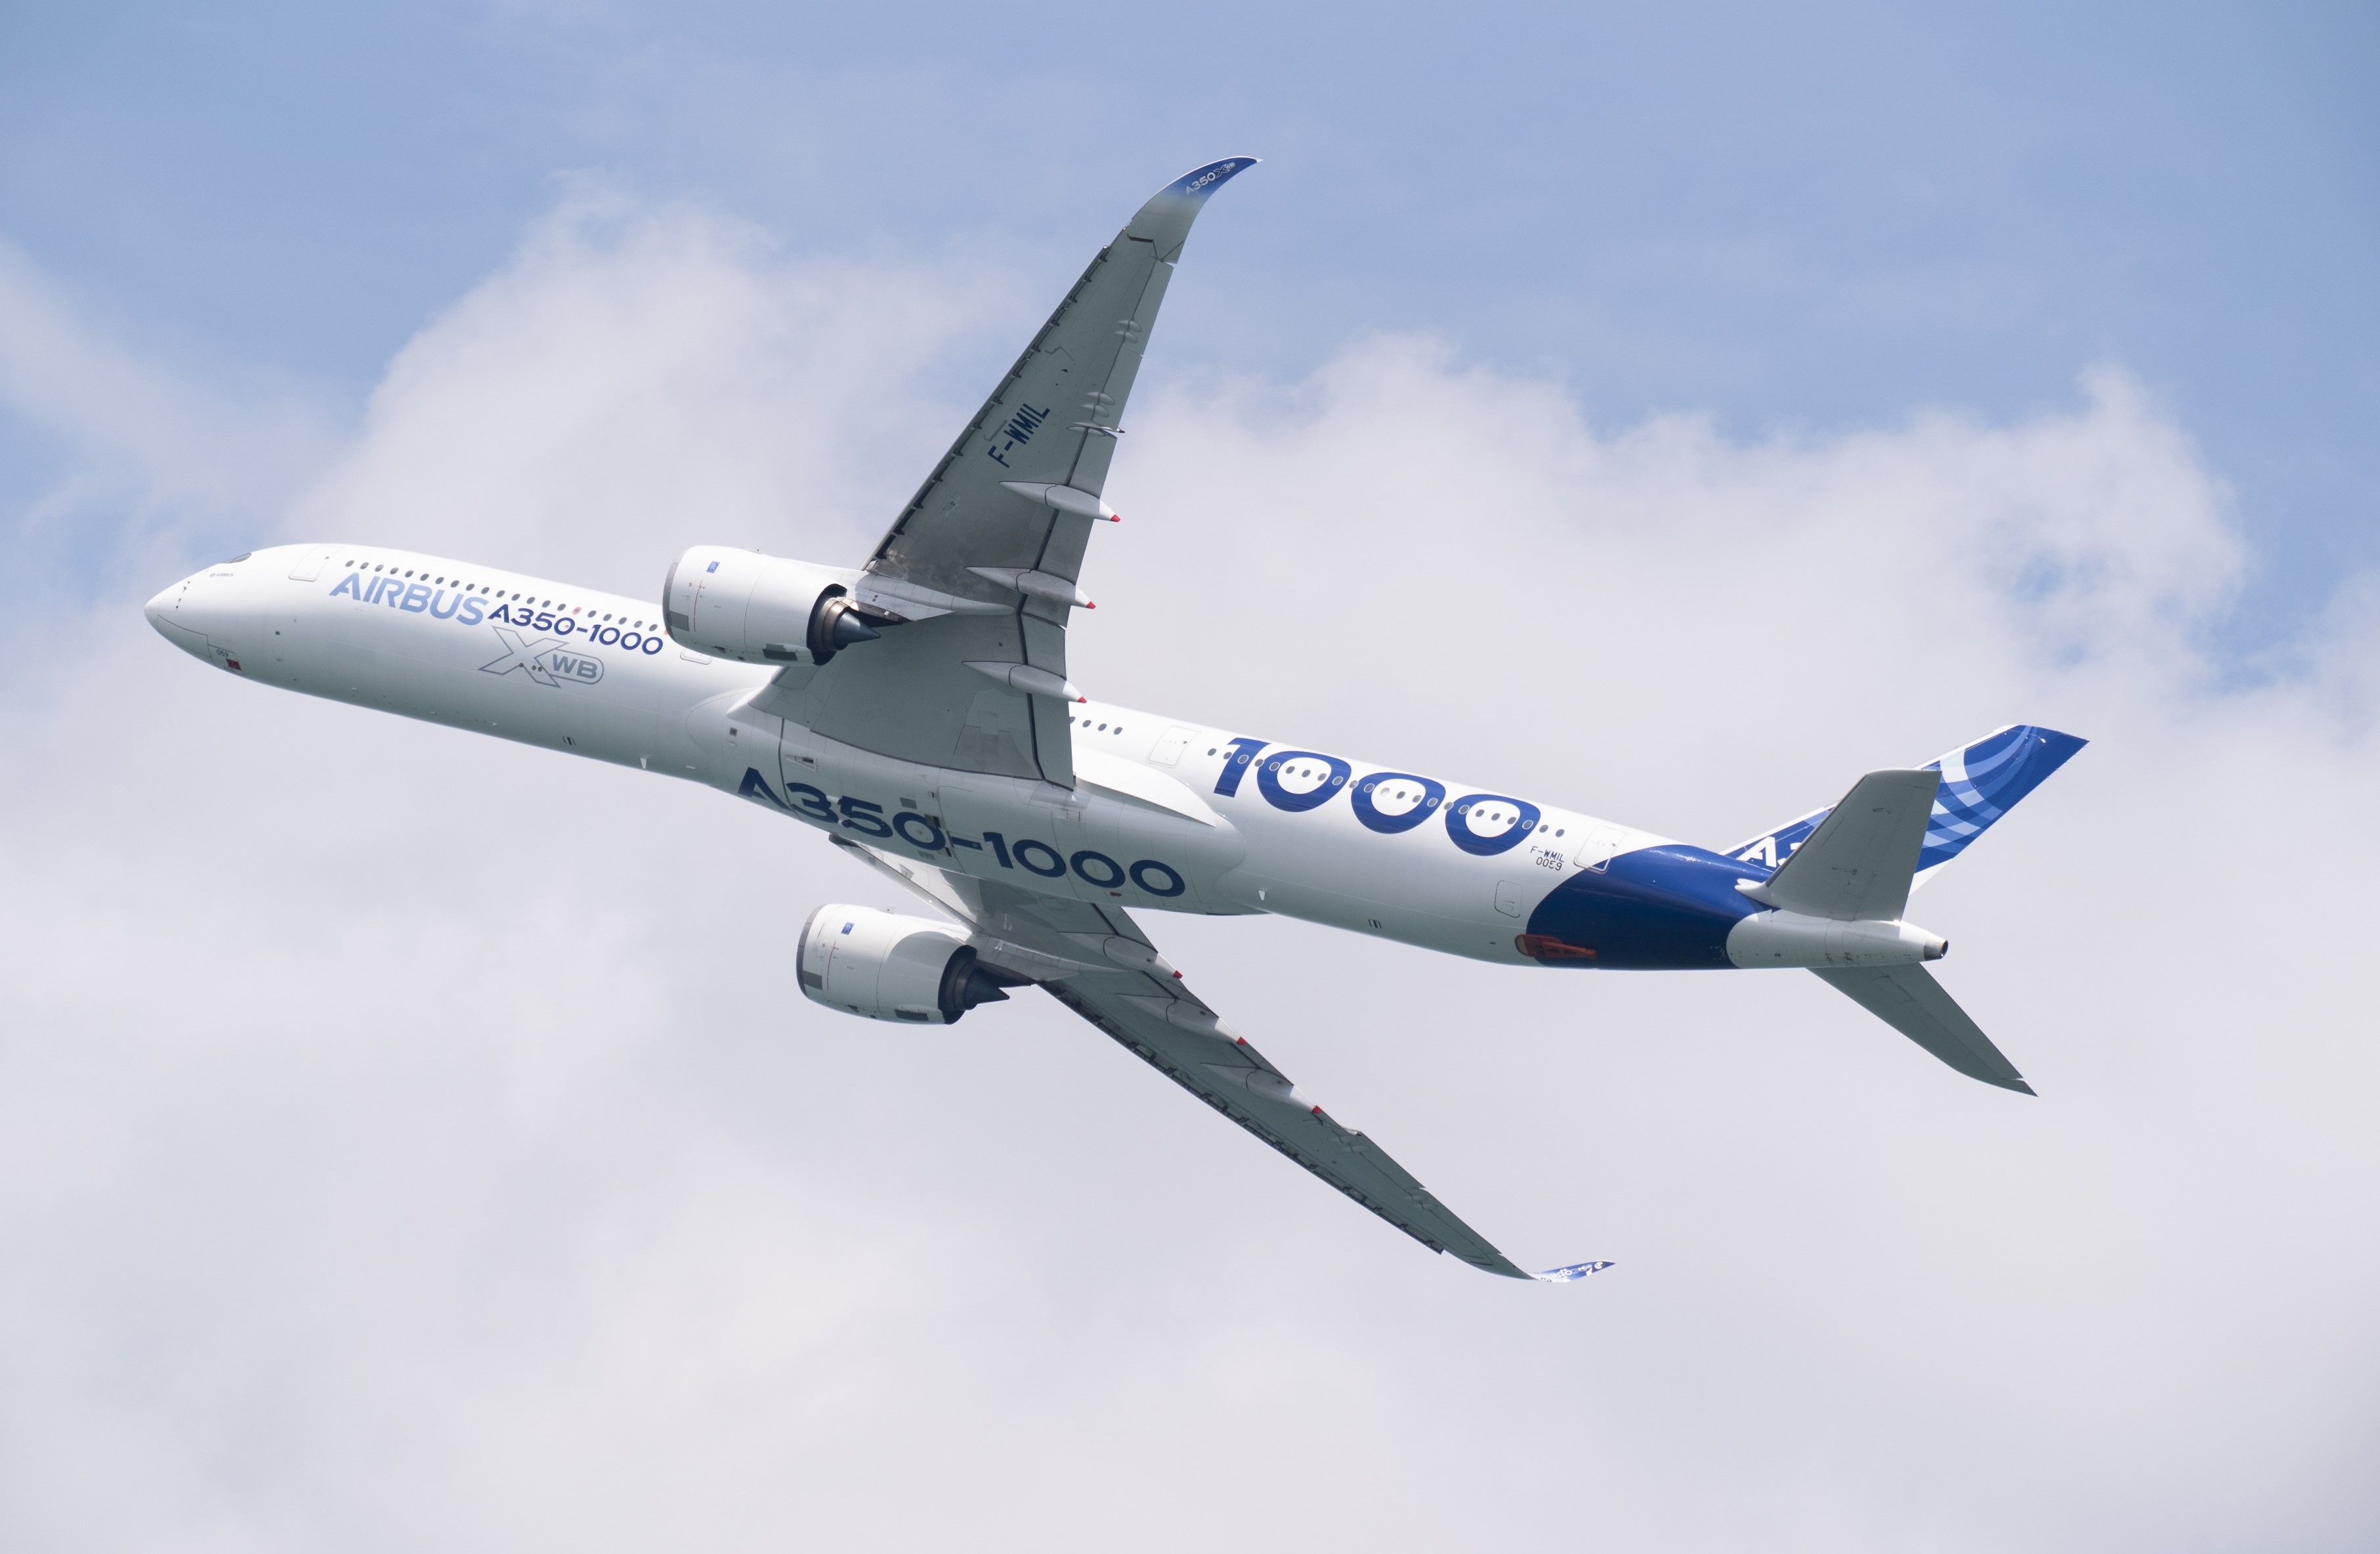 Singapore Airshow 2022 - A350-1000-flying display